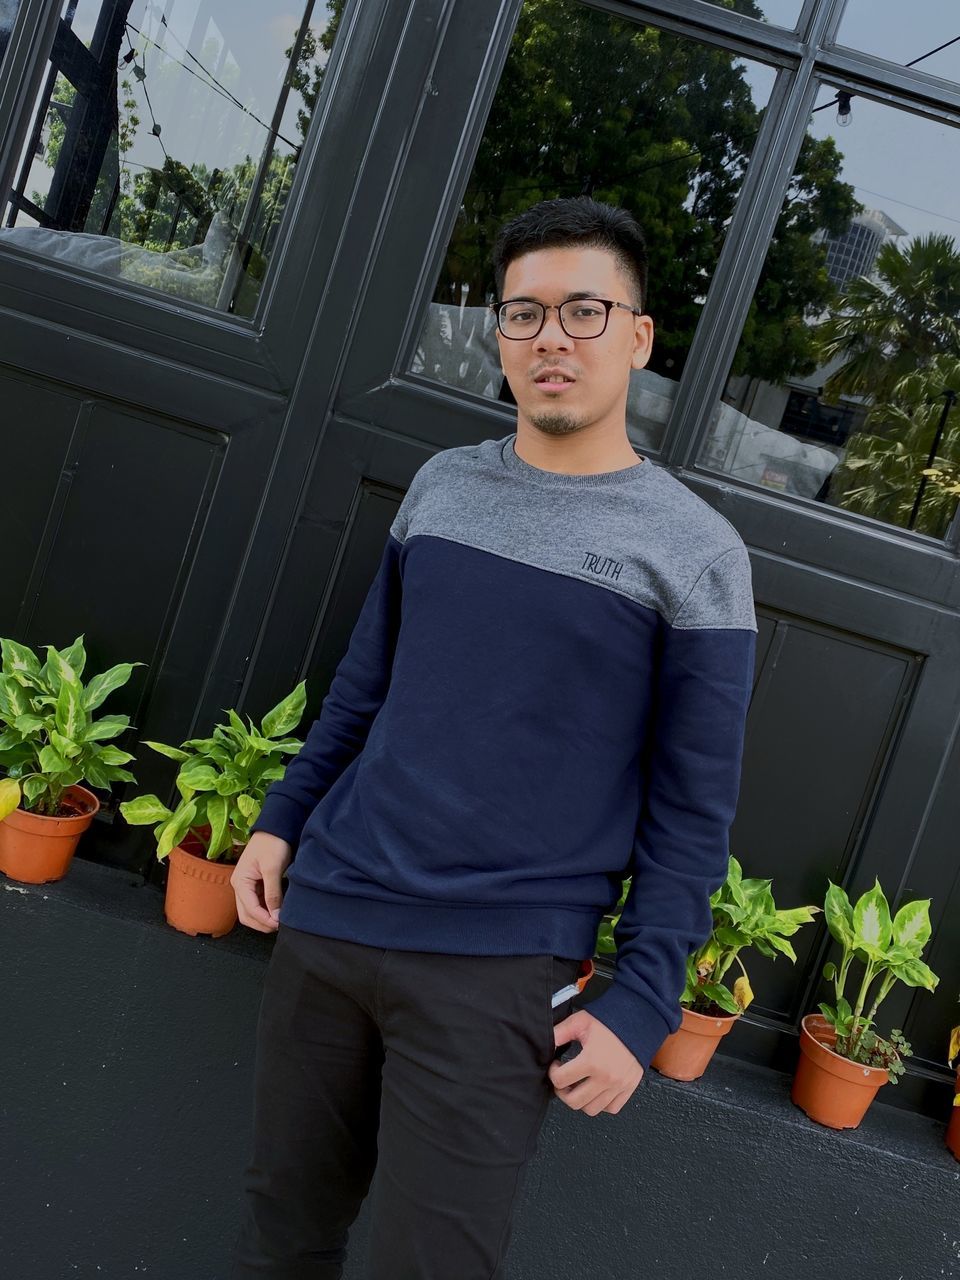 PORTRAIT OF YOUNG MAN STANDING AGAINST POTTED PLANTS